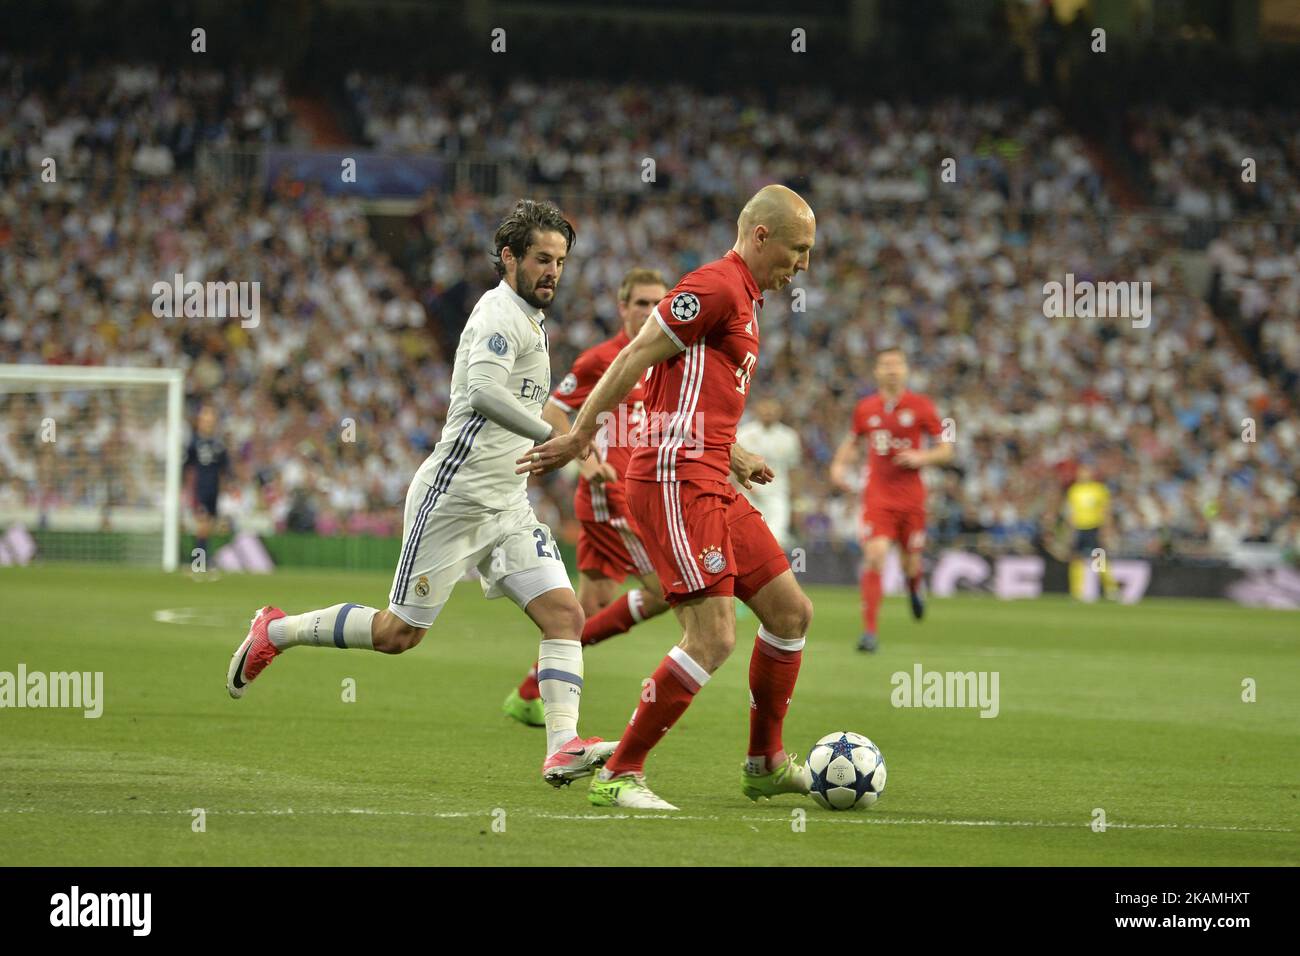 Bayern Munich's Dutch midfielder Arjen Robben (R) competes for the ball with Francisco Roman Alarcon alias Isco (L) during the UEFA Champions League quarter-final second leg football match Real Madrid vs FC Bayern Munich at the Santiago Bernabeu stadium in Madrid in Madrid on April 18, 2017 (Photo by Isa Saiz/NurPhoto) *** Please Use Credit from Credit Field *** Stock Photo